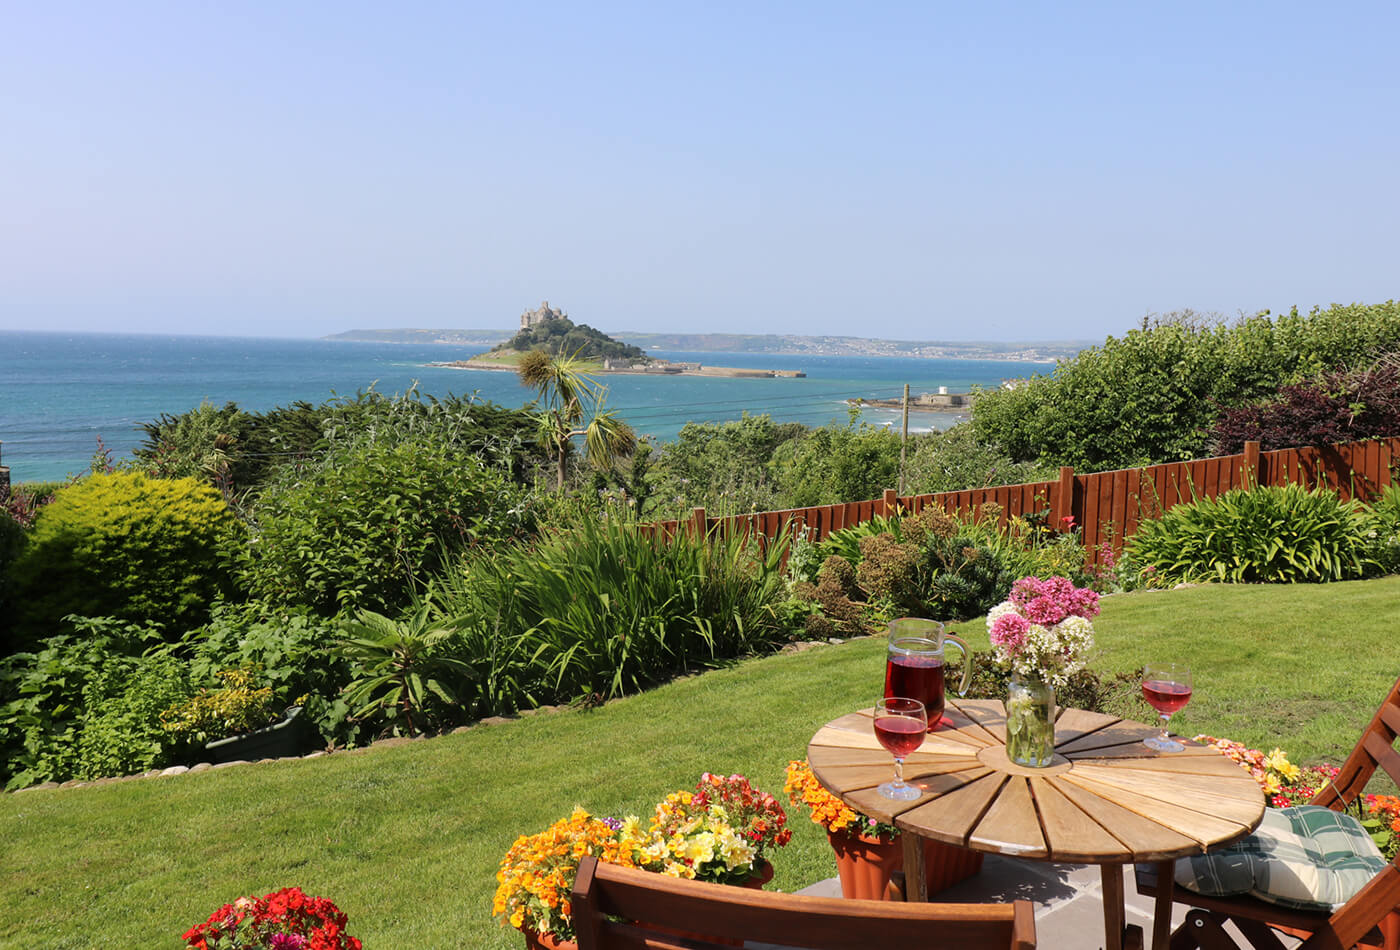 Cornwall Cottage View - How do I market and advertise my holiday cottage?